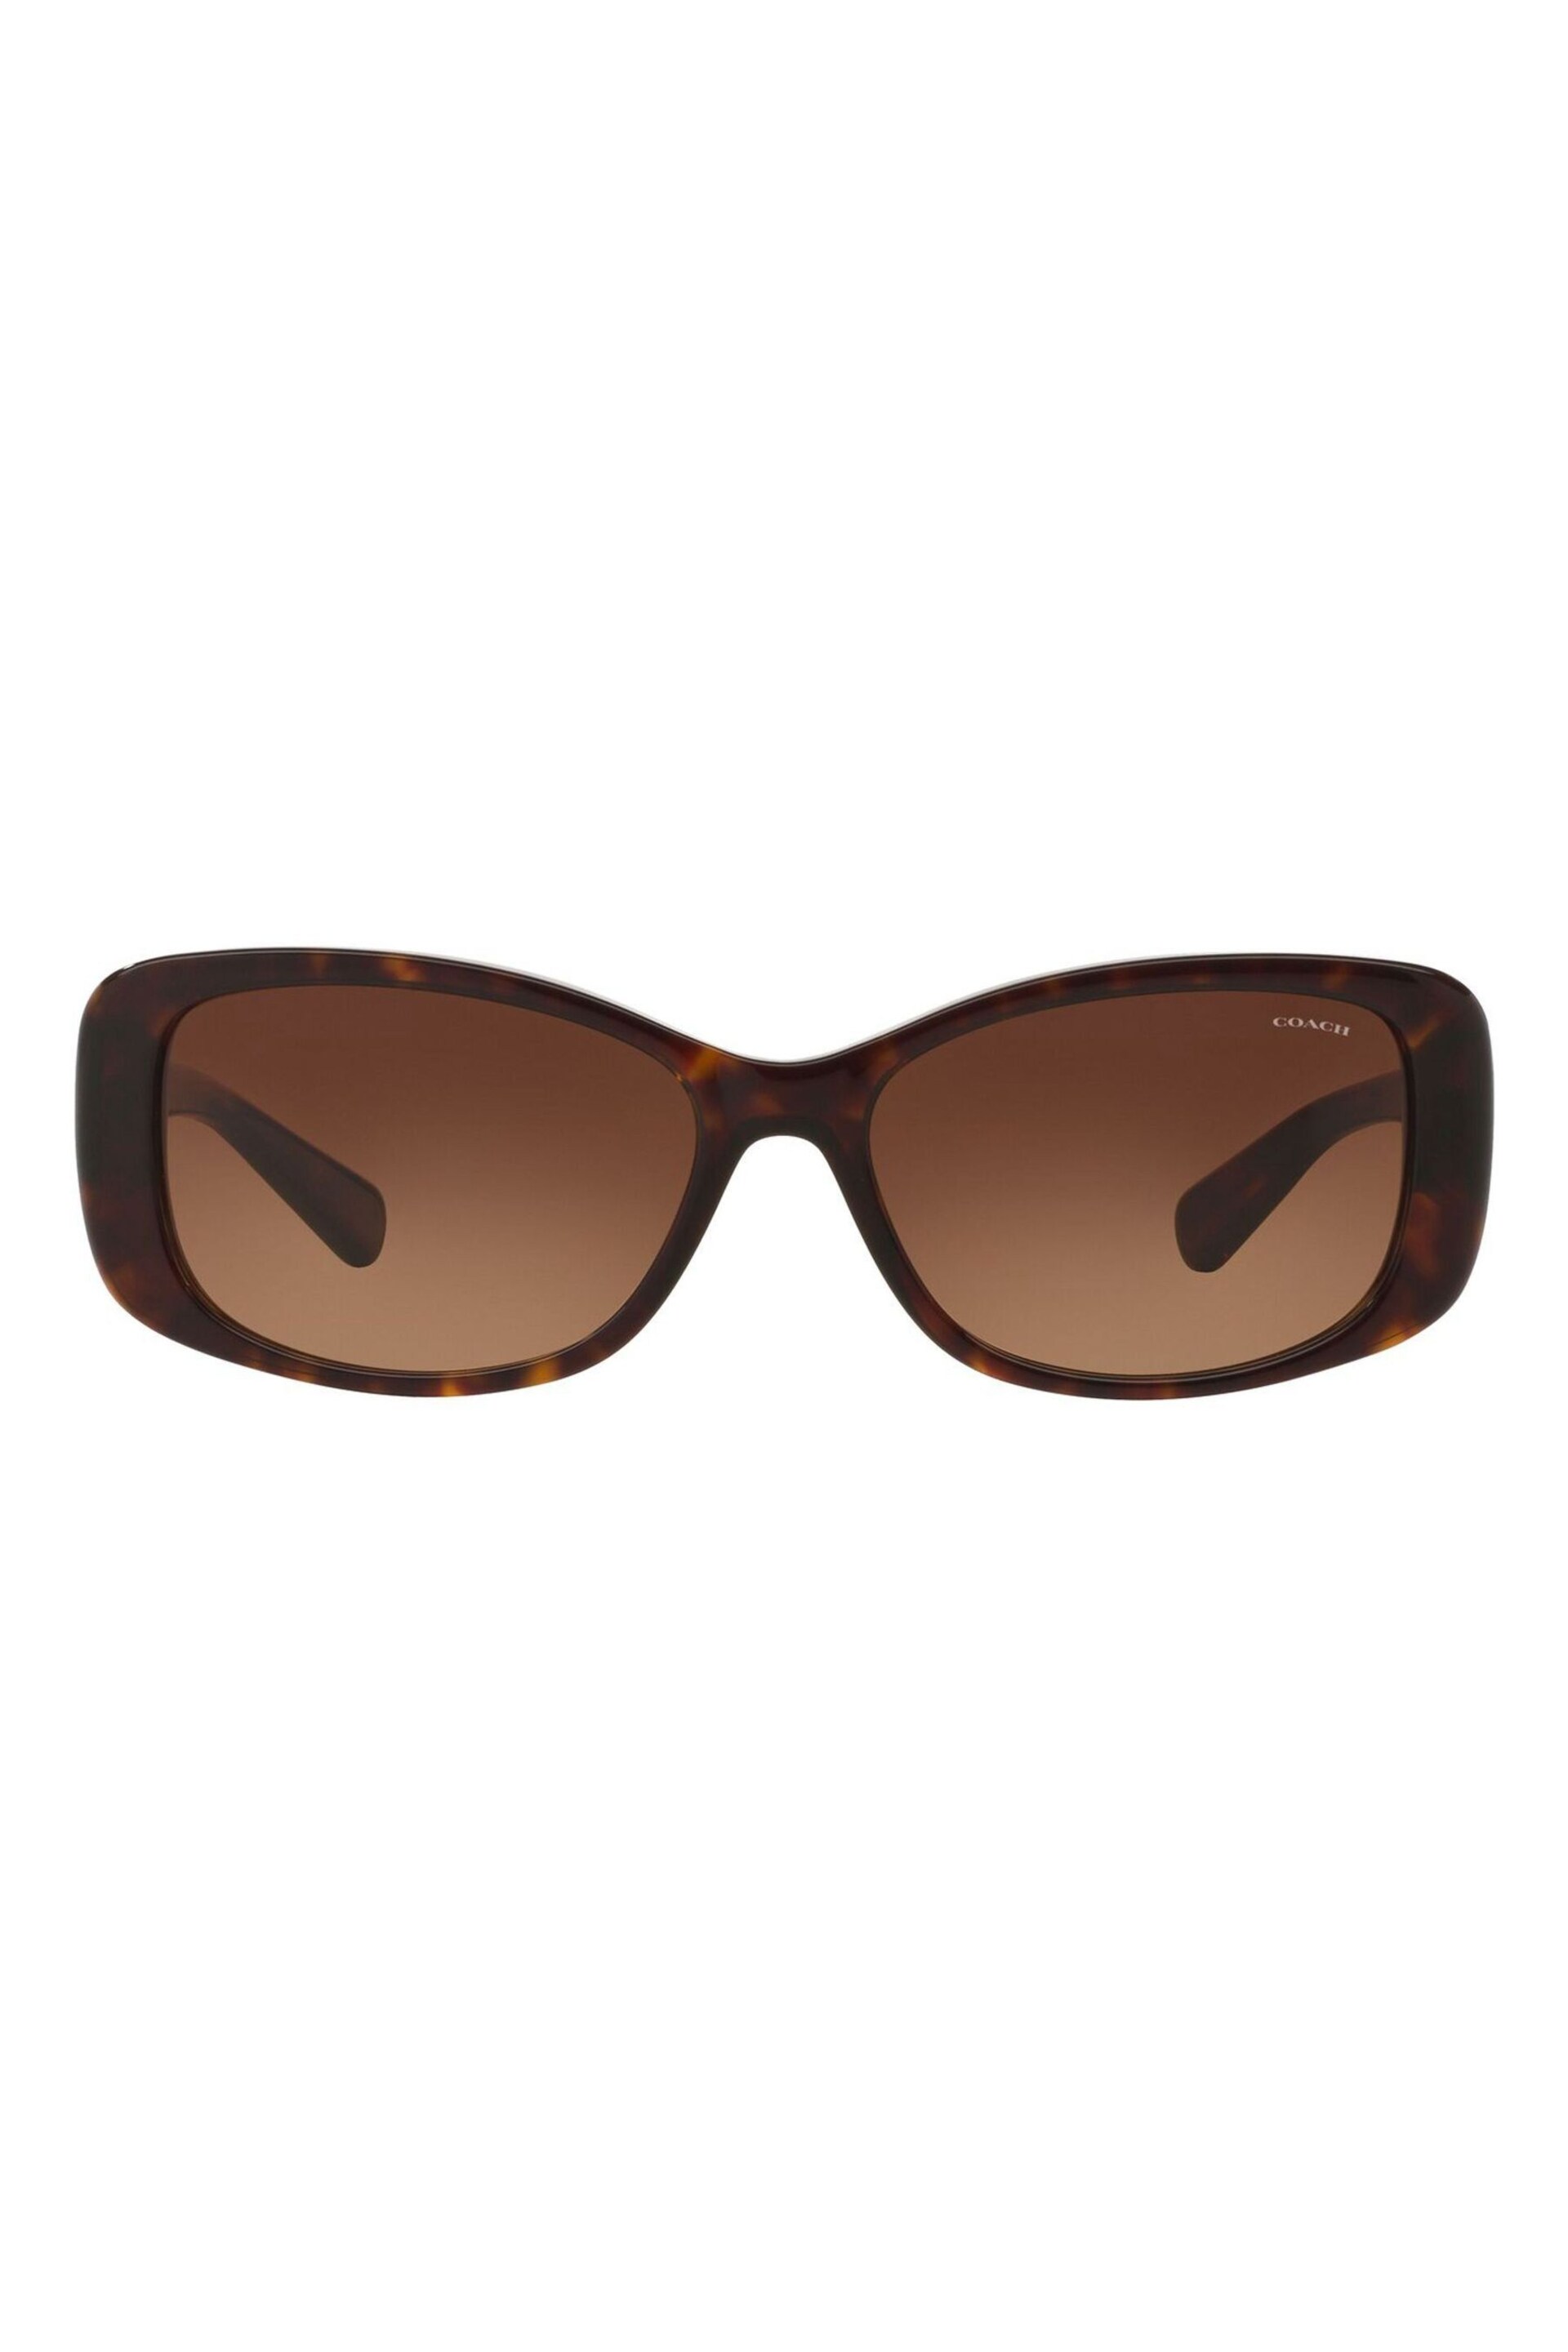 Coach Brown L156 Oval Sunglasses - Image 2 of 13